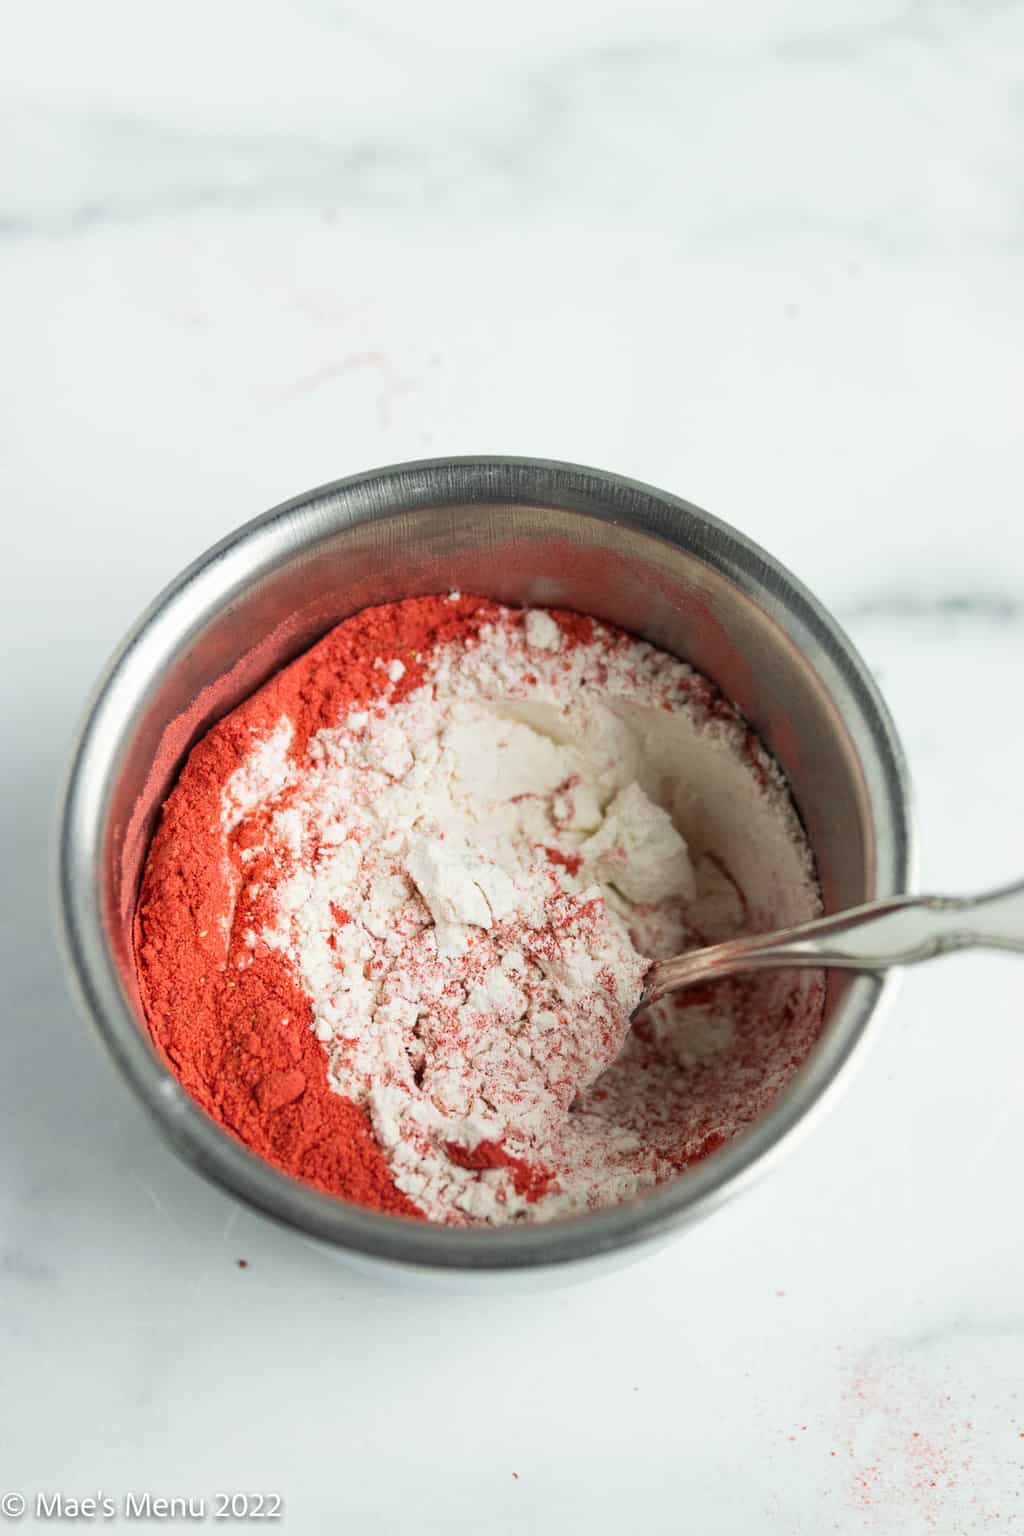 Strawberry powder and flour in a small mixing bowl.